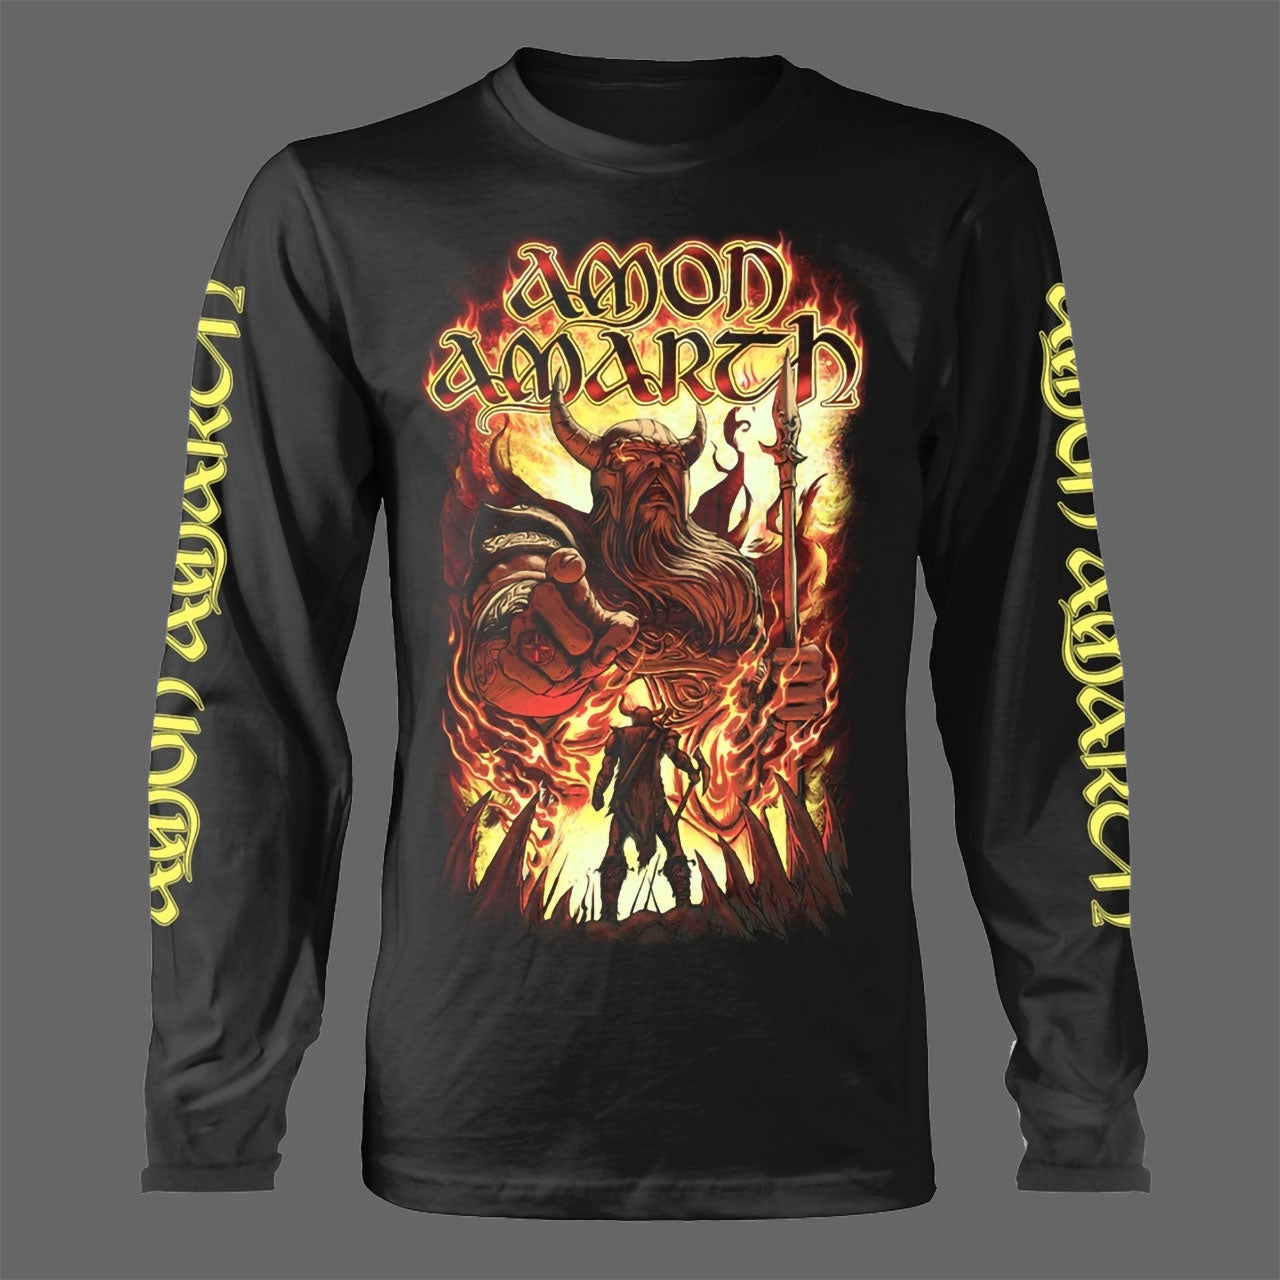 Amon Amarth - Oden Wants You (Long Sleeve T-Shirt)